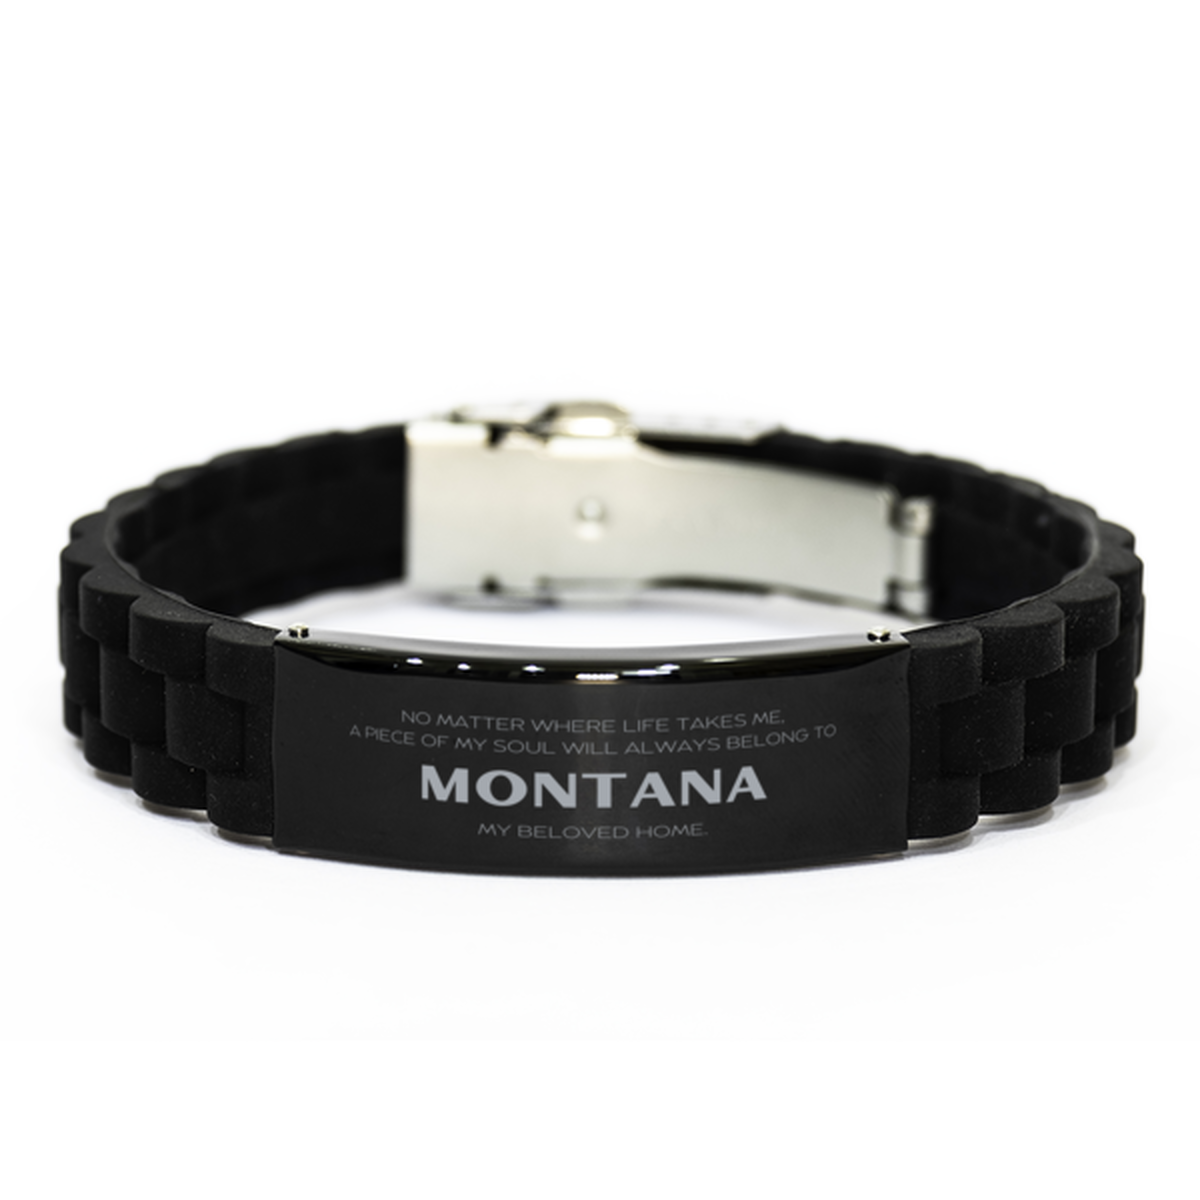 Love Montana State Gifts, My soul will always belong to Montana, Proud Black Glidelock Clasp Bracelet, Birthday Unique Gifts For Montana Men, Women, Friends